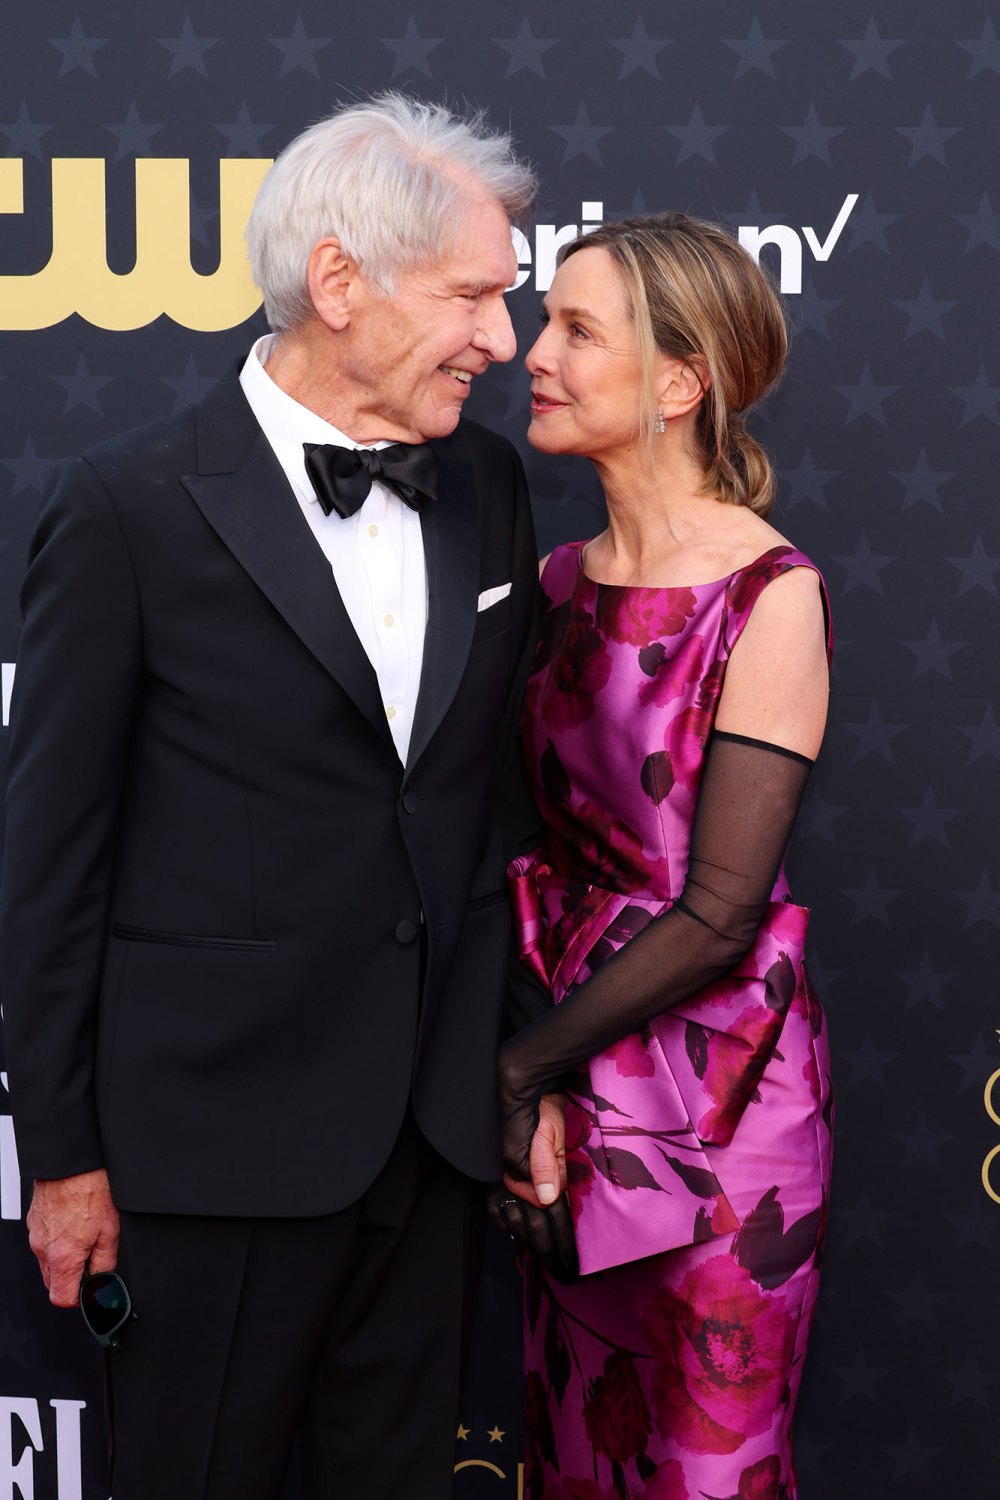 Calista Flockhart and Harrison Ford